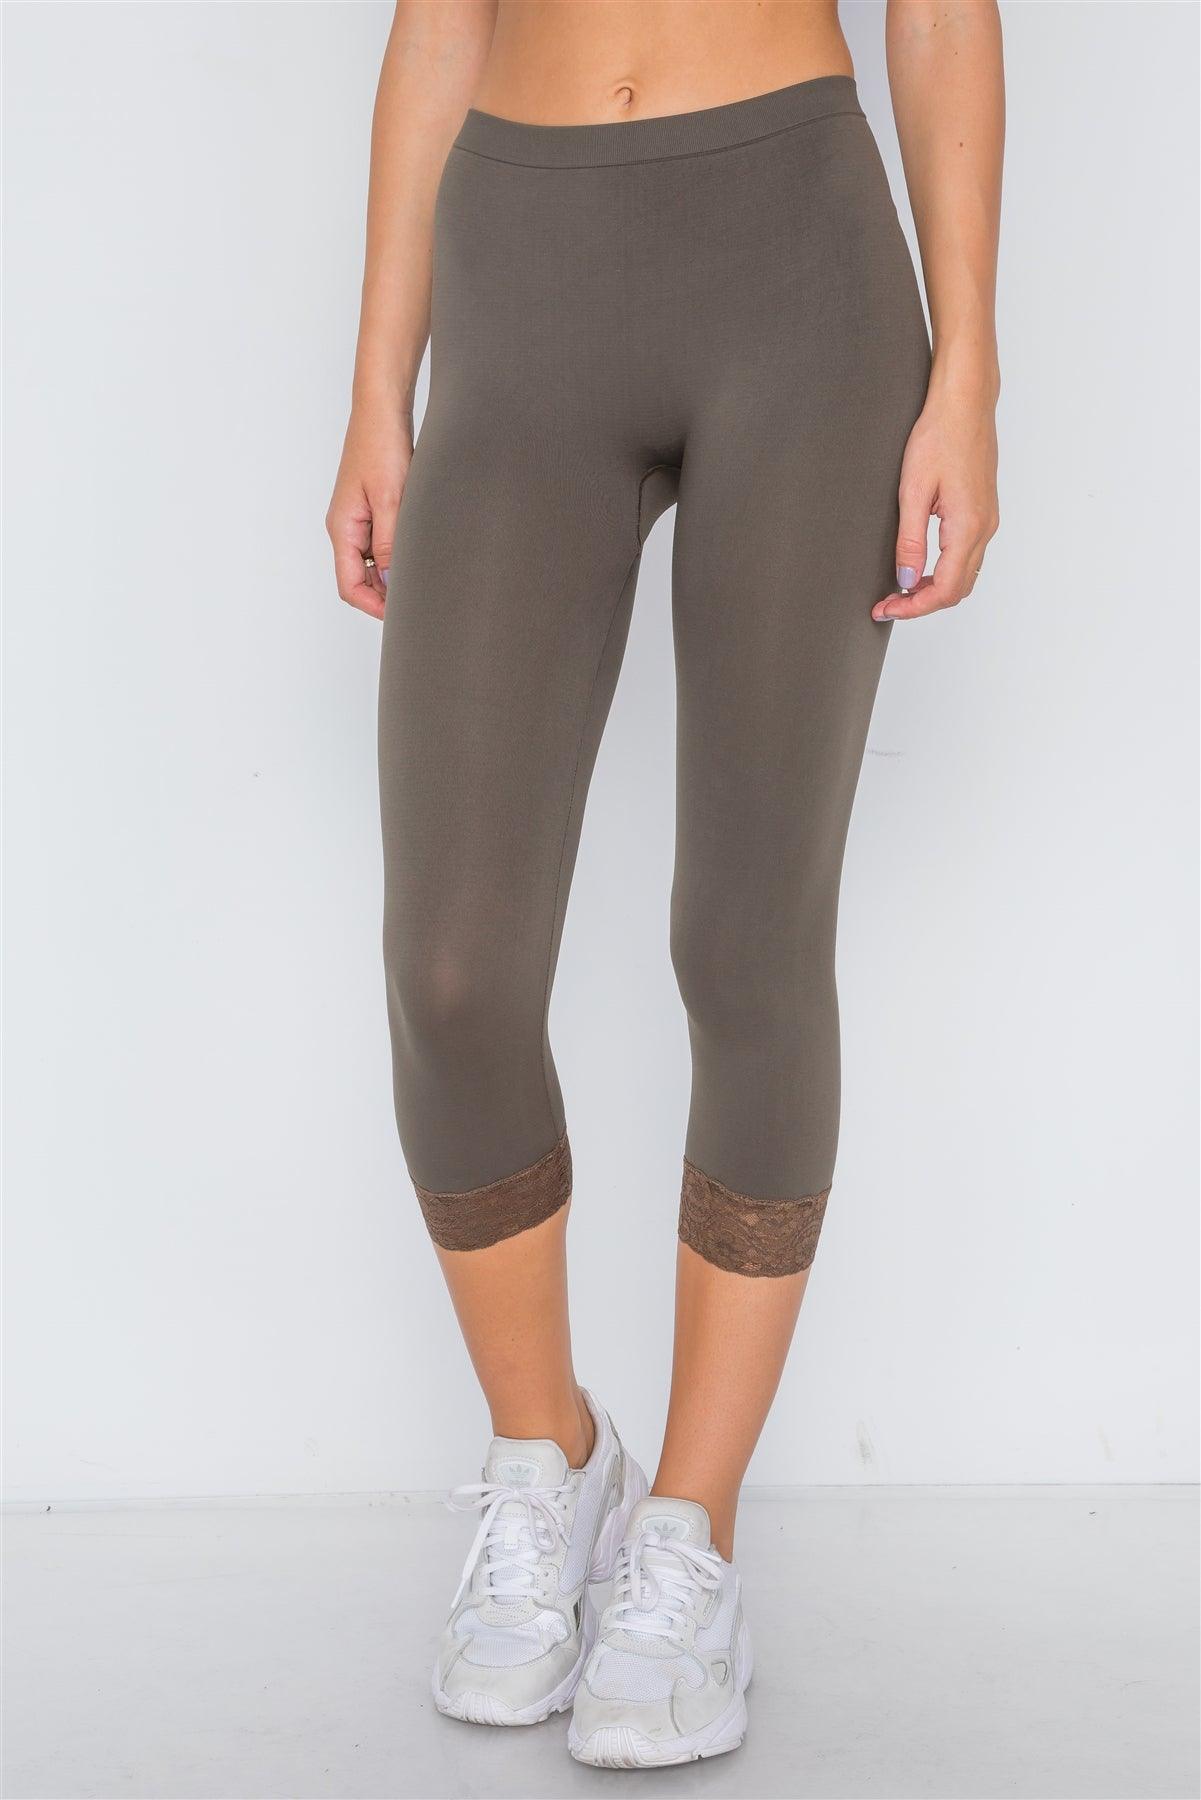 Olive Sports Yoga Seamless Stretchy Leggings with Lace Detail /3-3